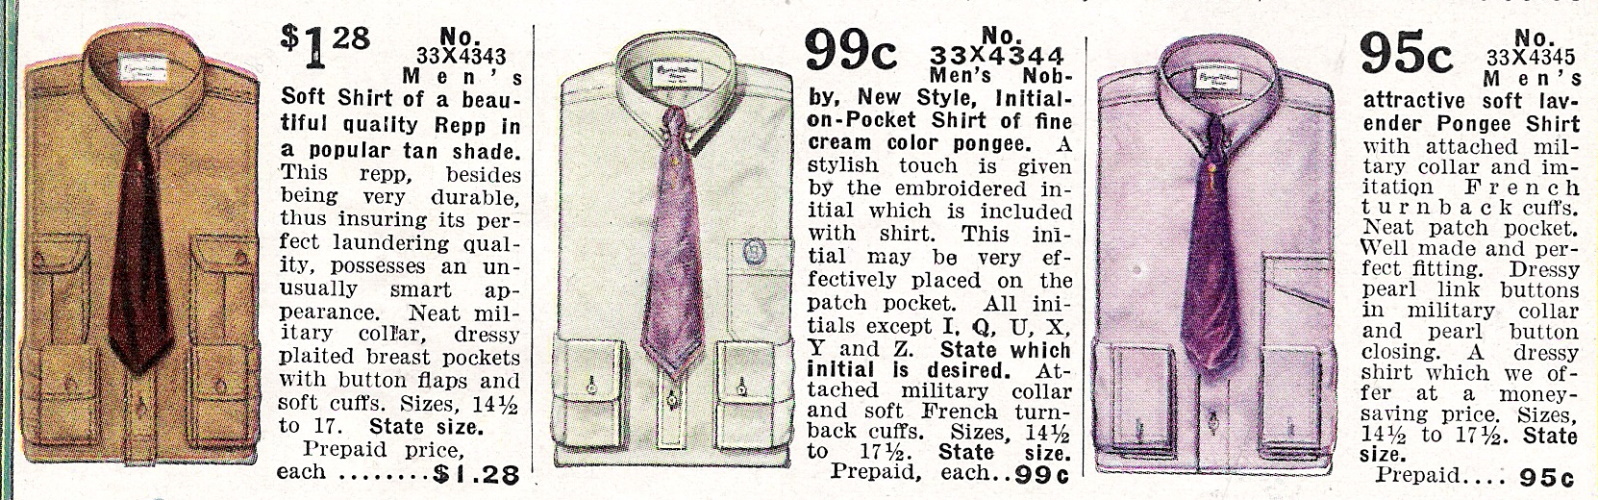 Mens 1914 soft shirts with one or two pockets